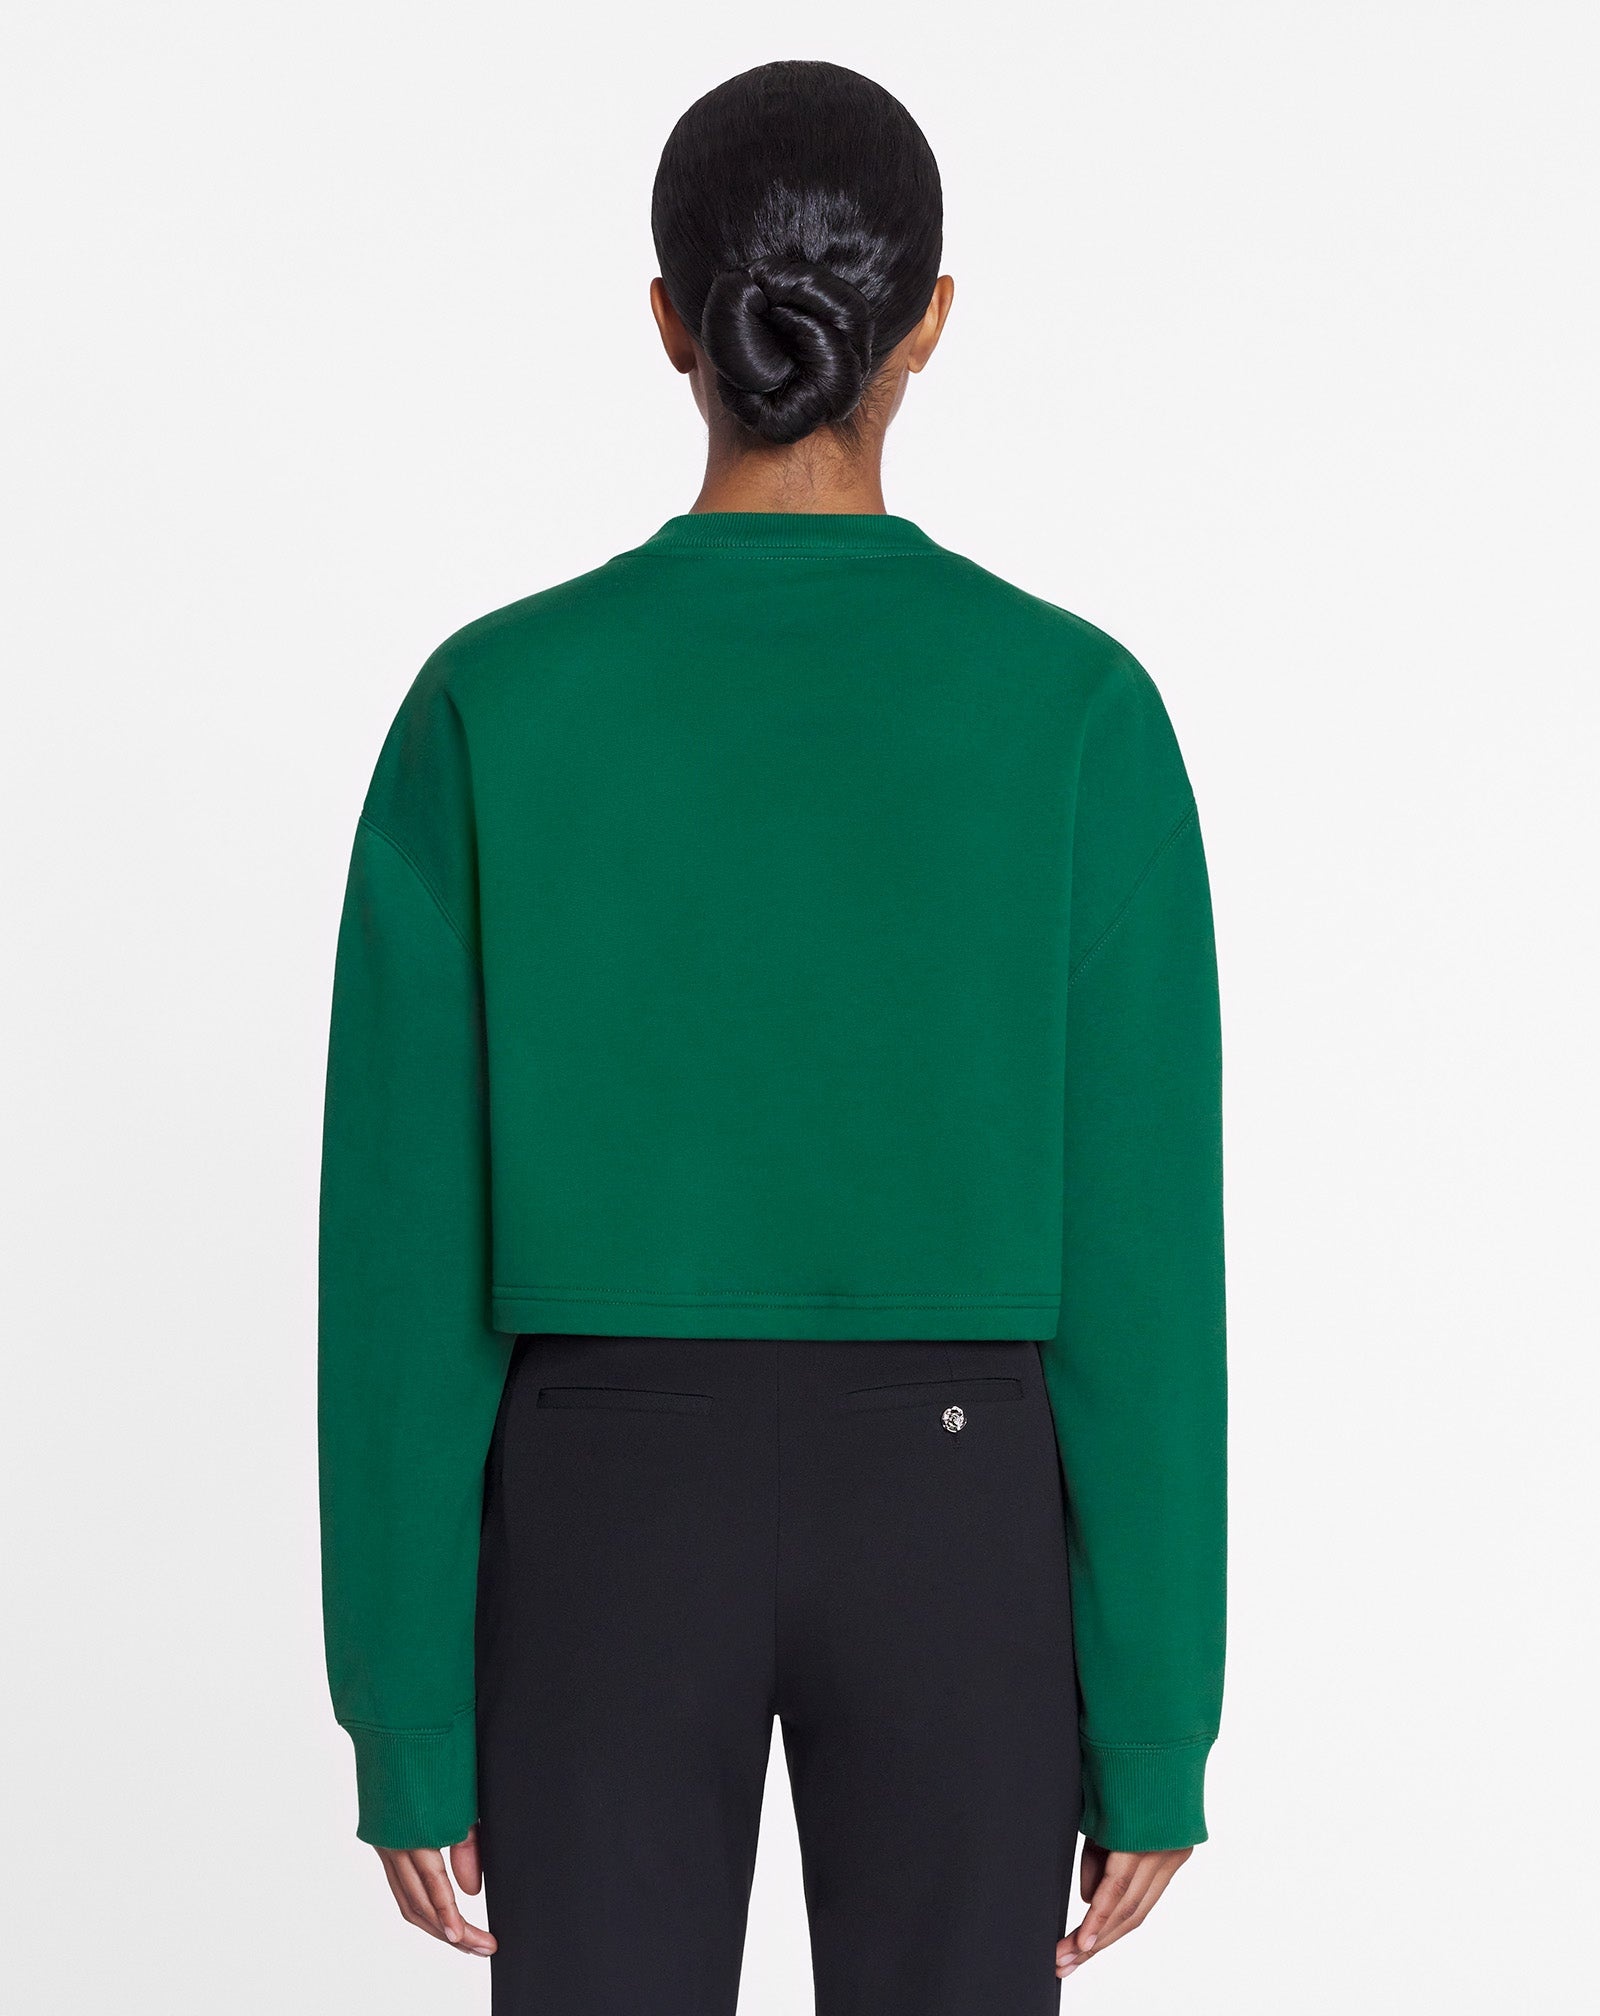 CURB EMBROIDERED CROPPED SWEATSHIRT - 4